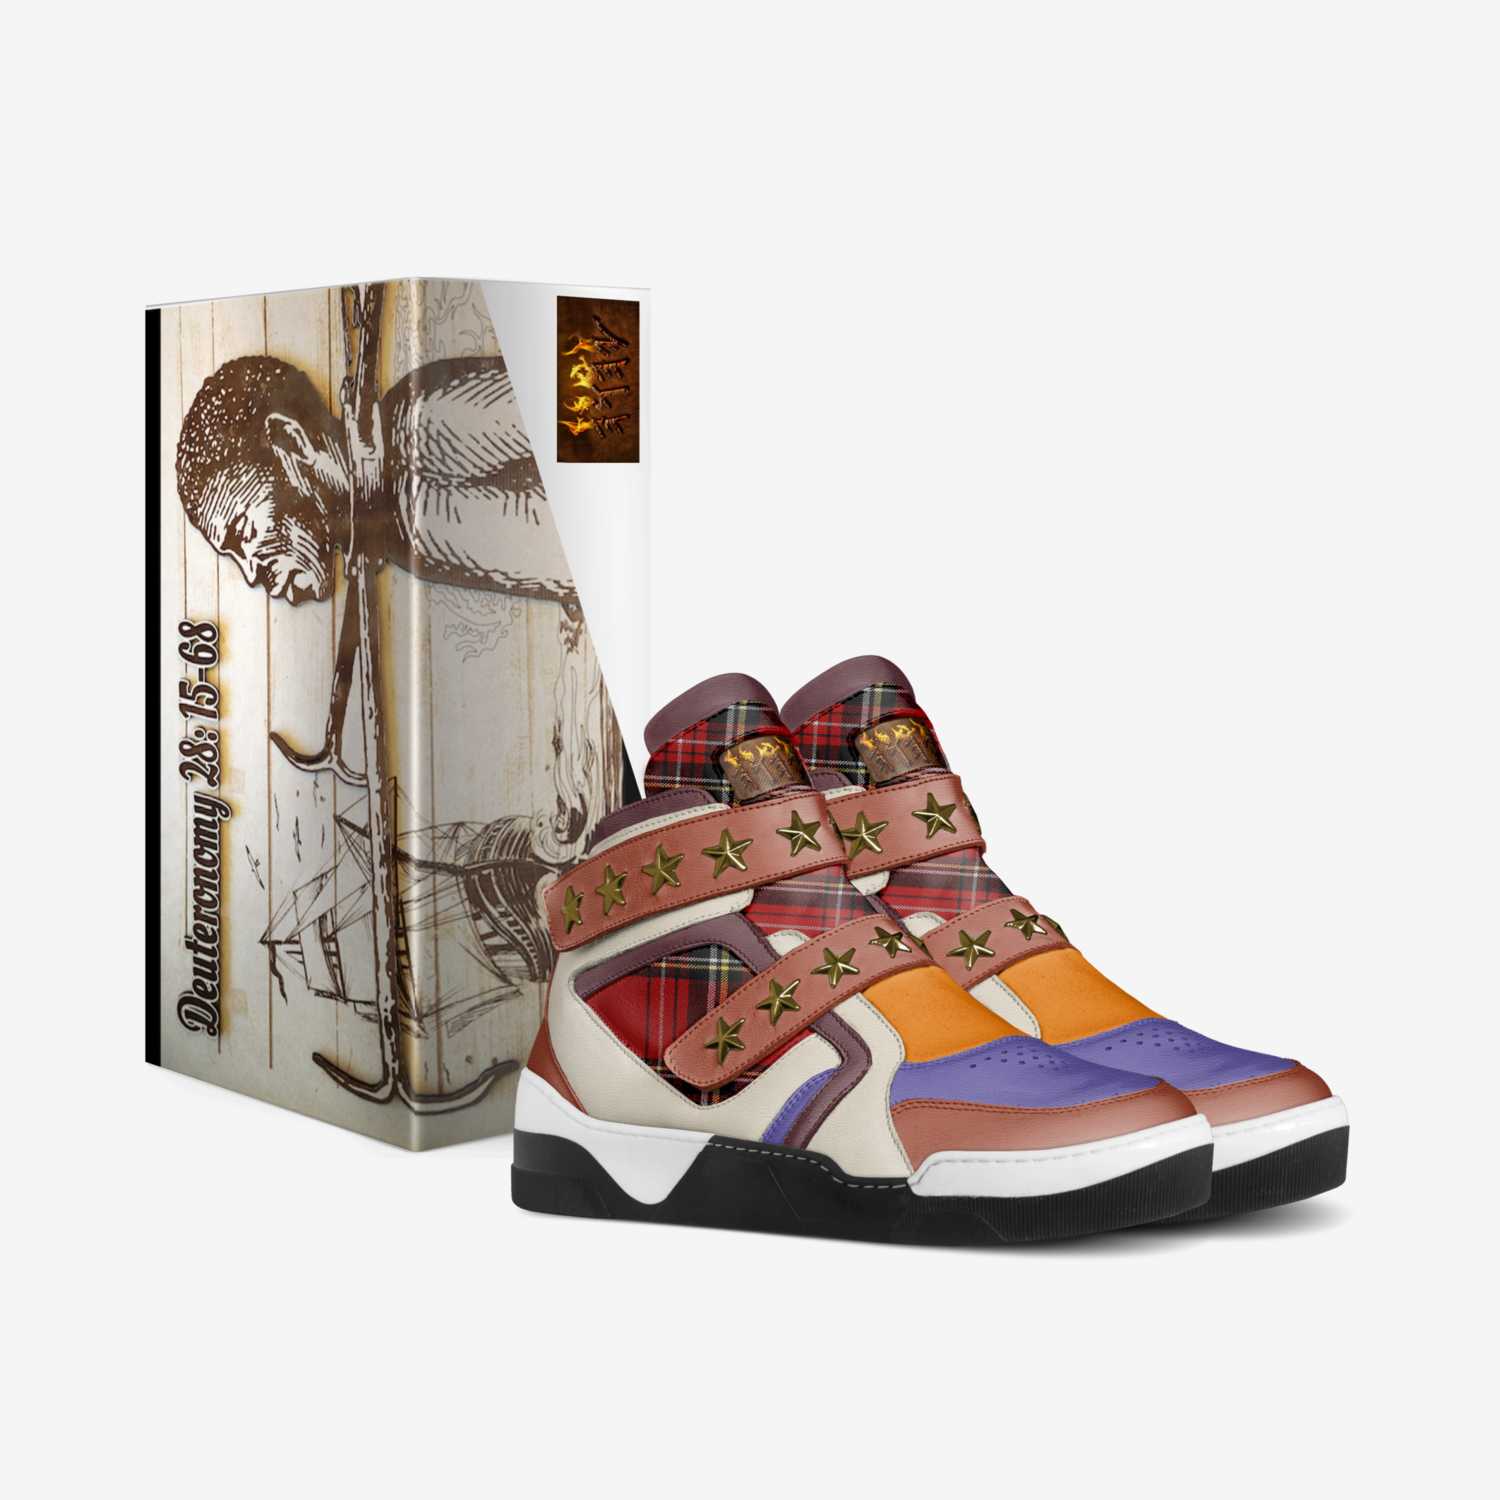 HEBREW ISRAELITES custom made in Italy shoes by Andre Butler | Box view